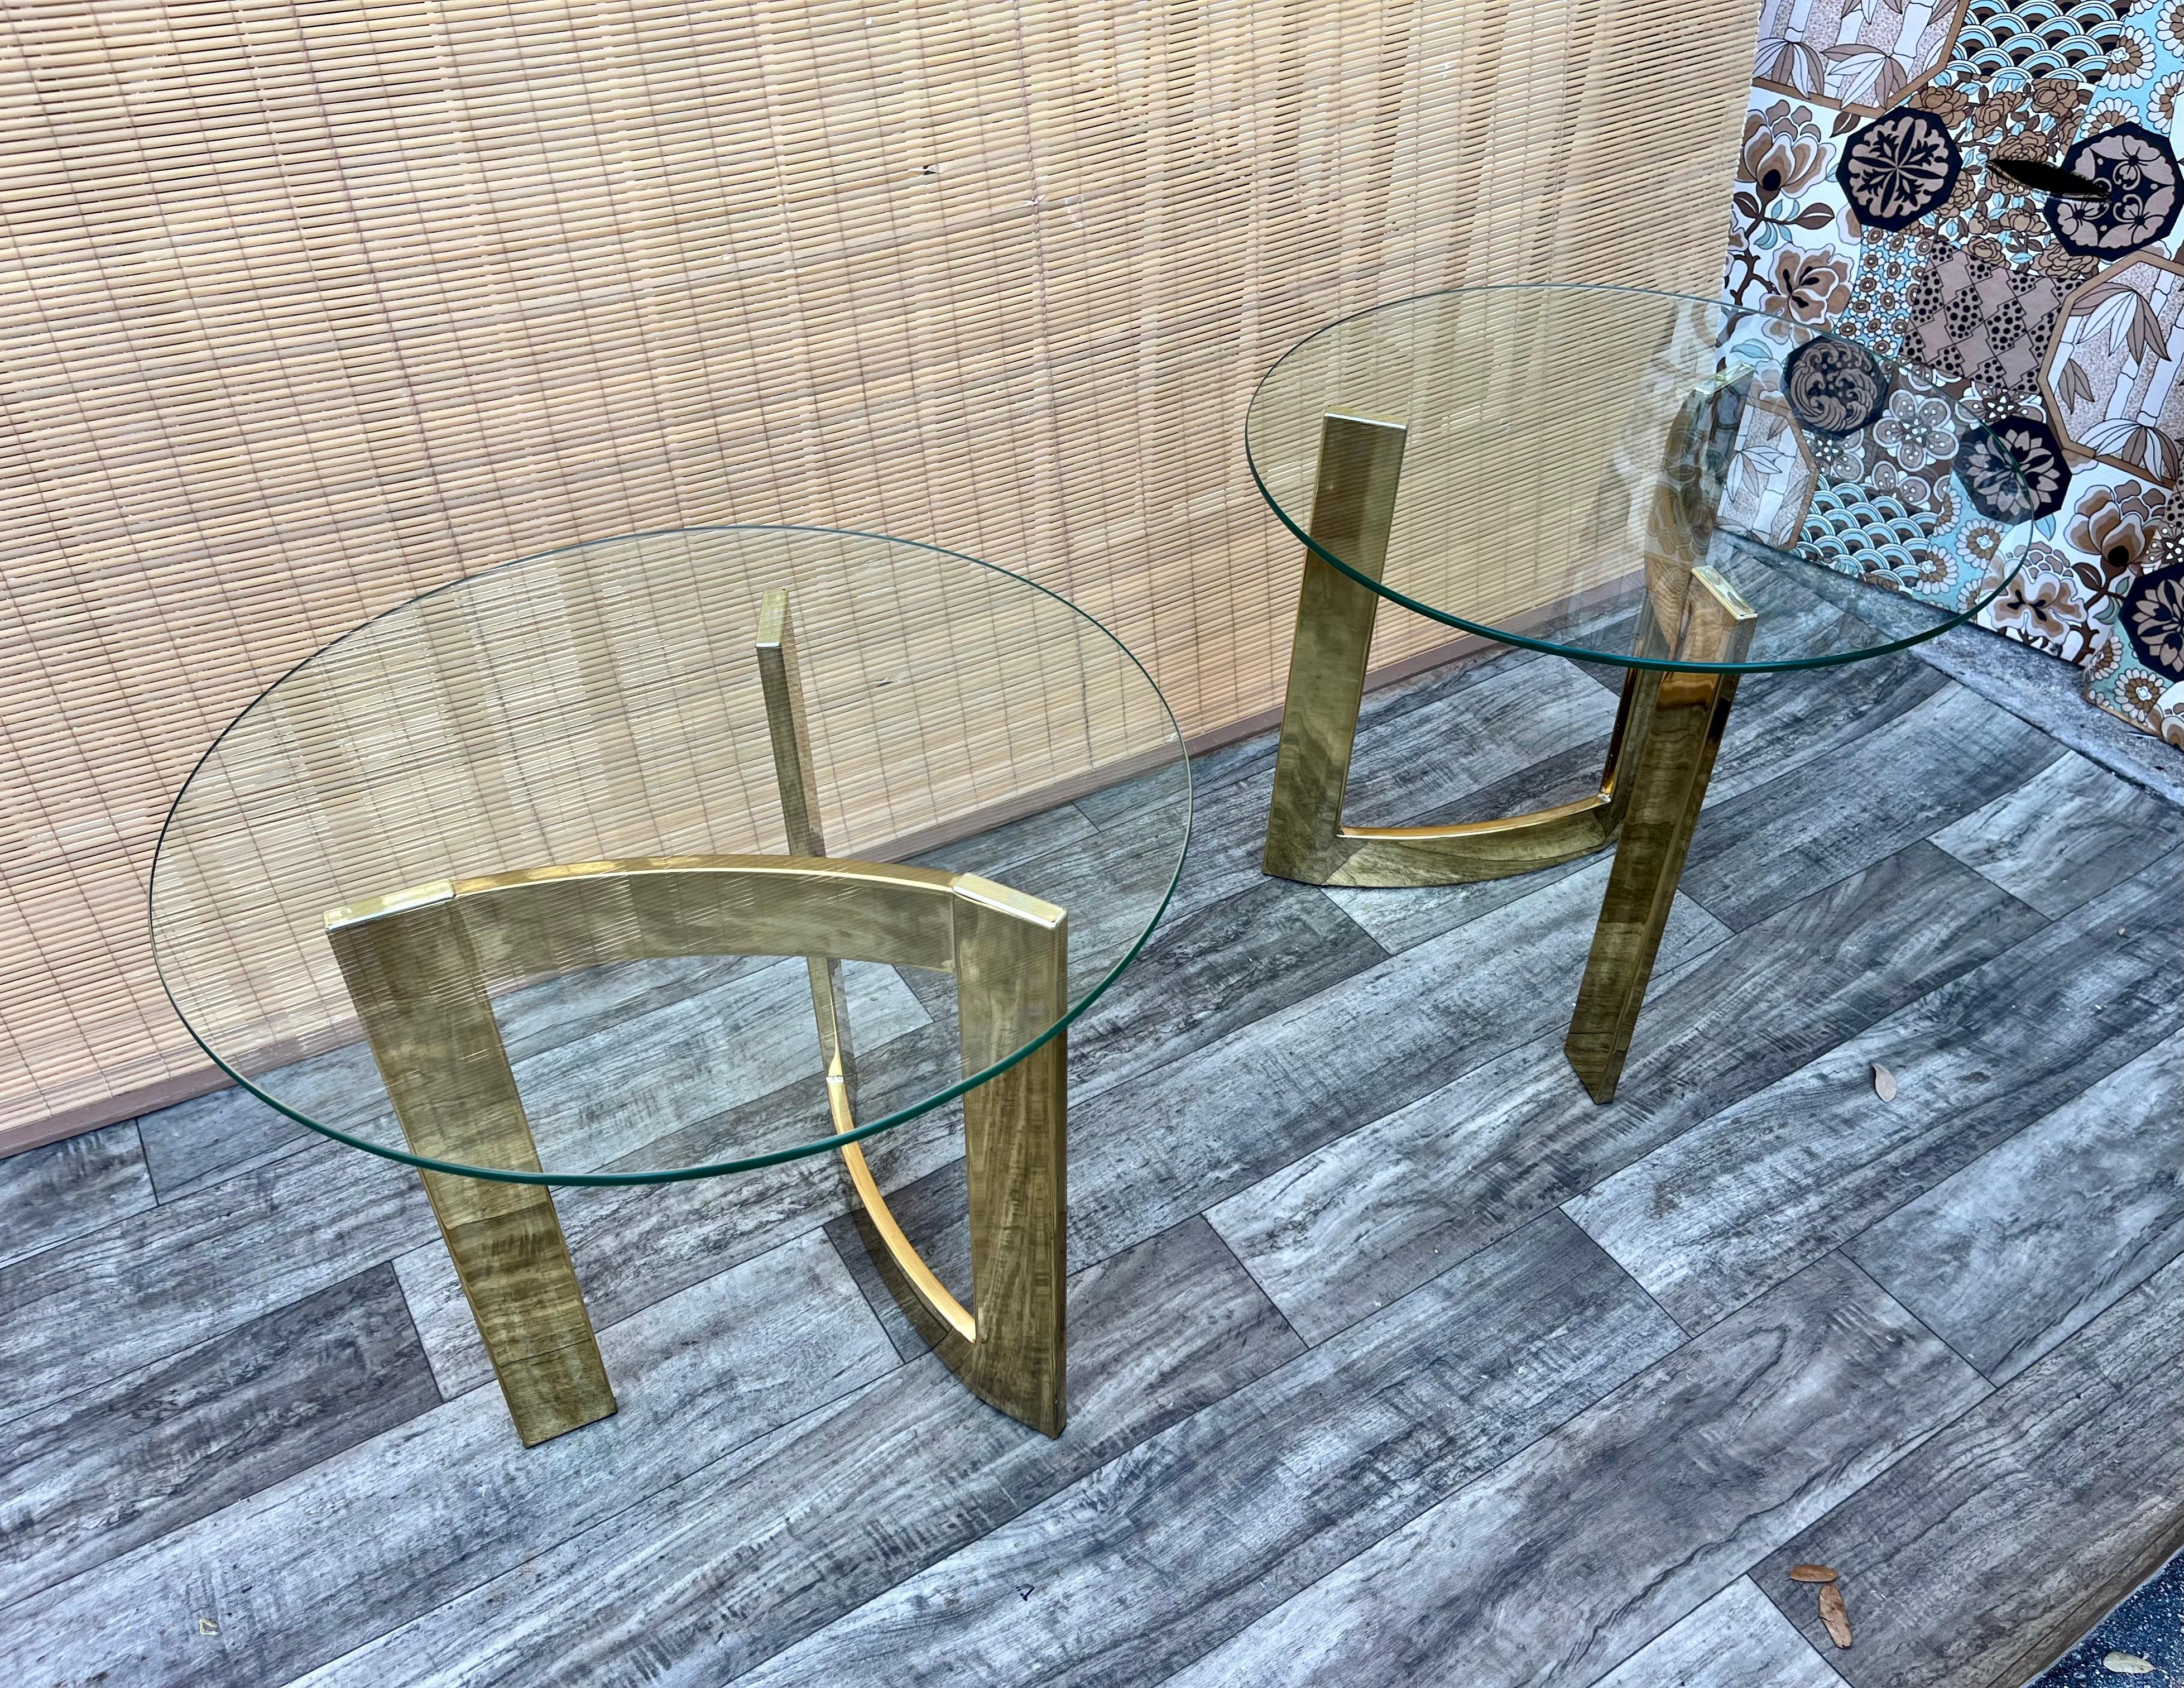 A Pair of Vintage Mid Century Modern / Hollywood Regency Brass tables in The Milo Baughman Style. Circa 1970s  Feature arched triangular shaped brass plated bases with removable round glass tops. 
In Excellent Original Condition With Minor Signs of